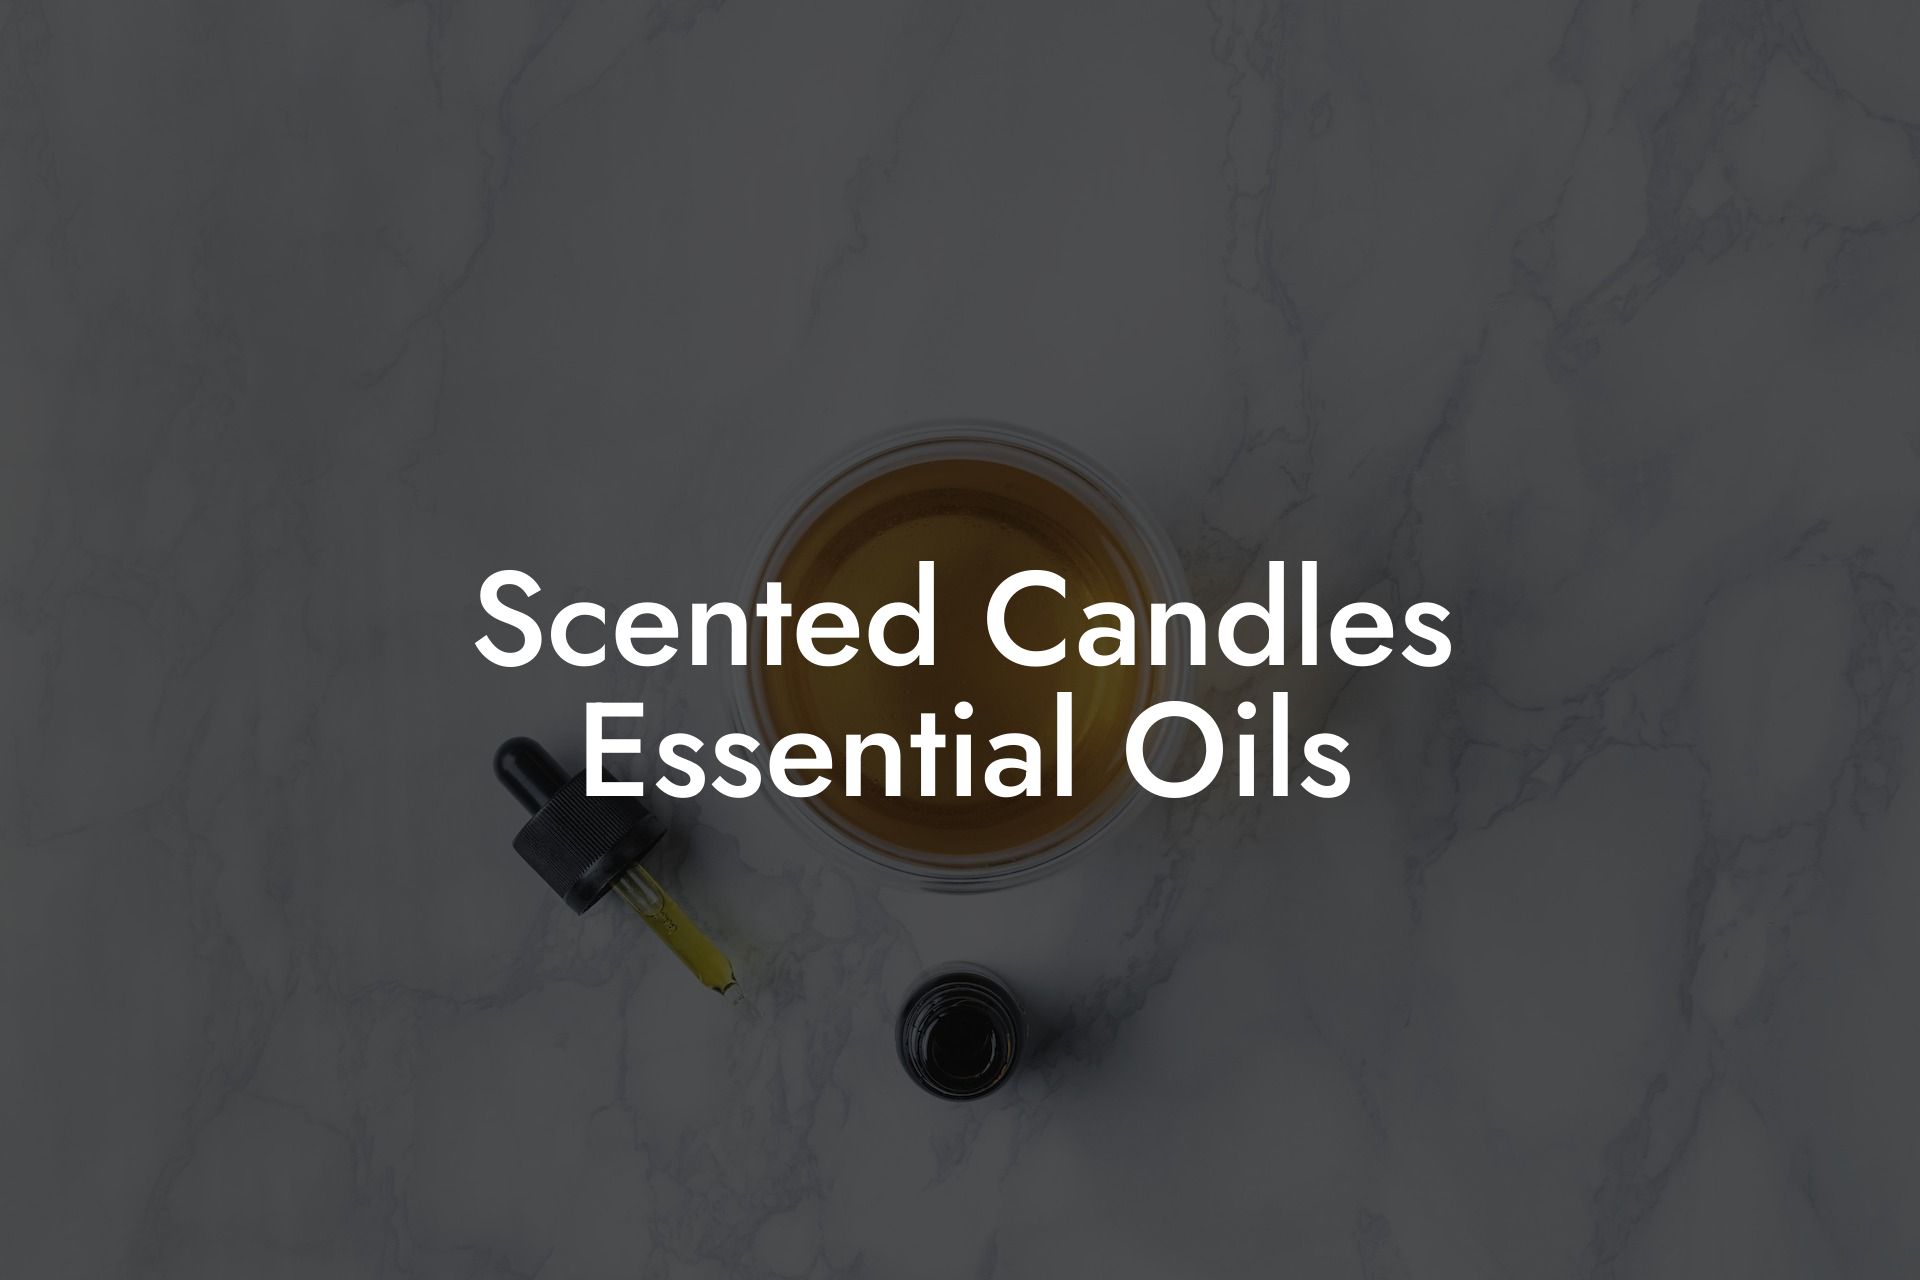 Scented Candles Essential Oils